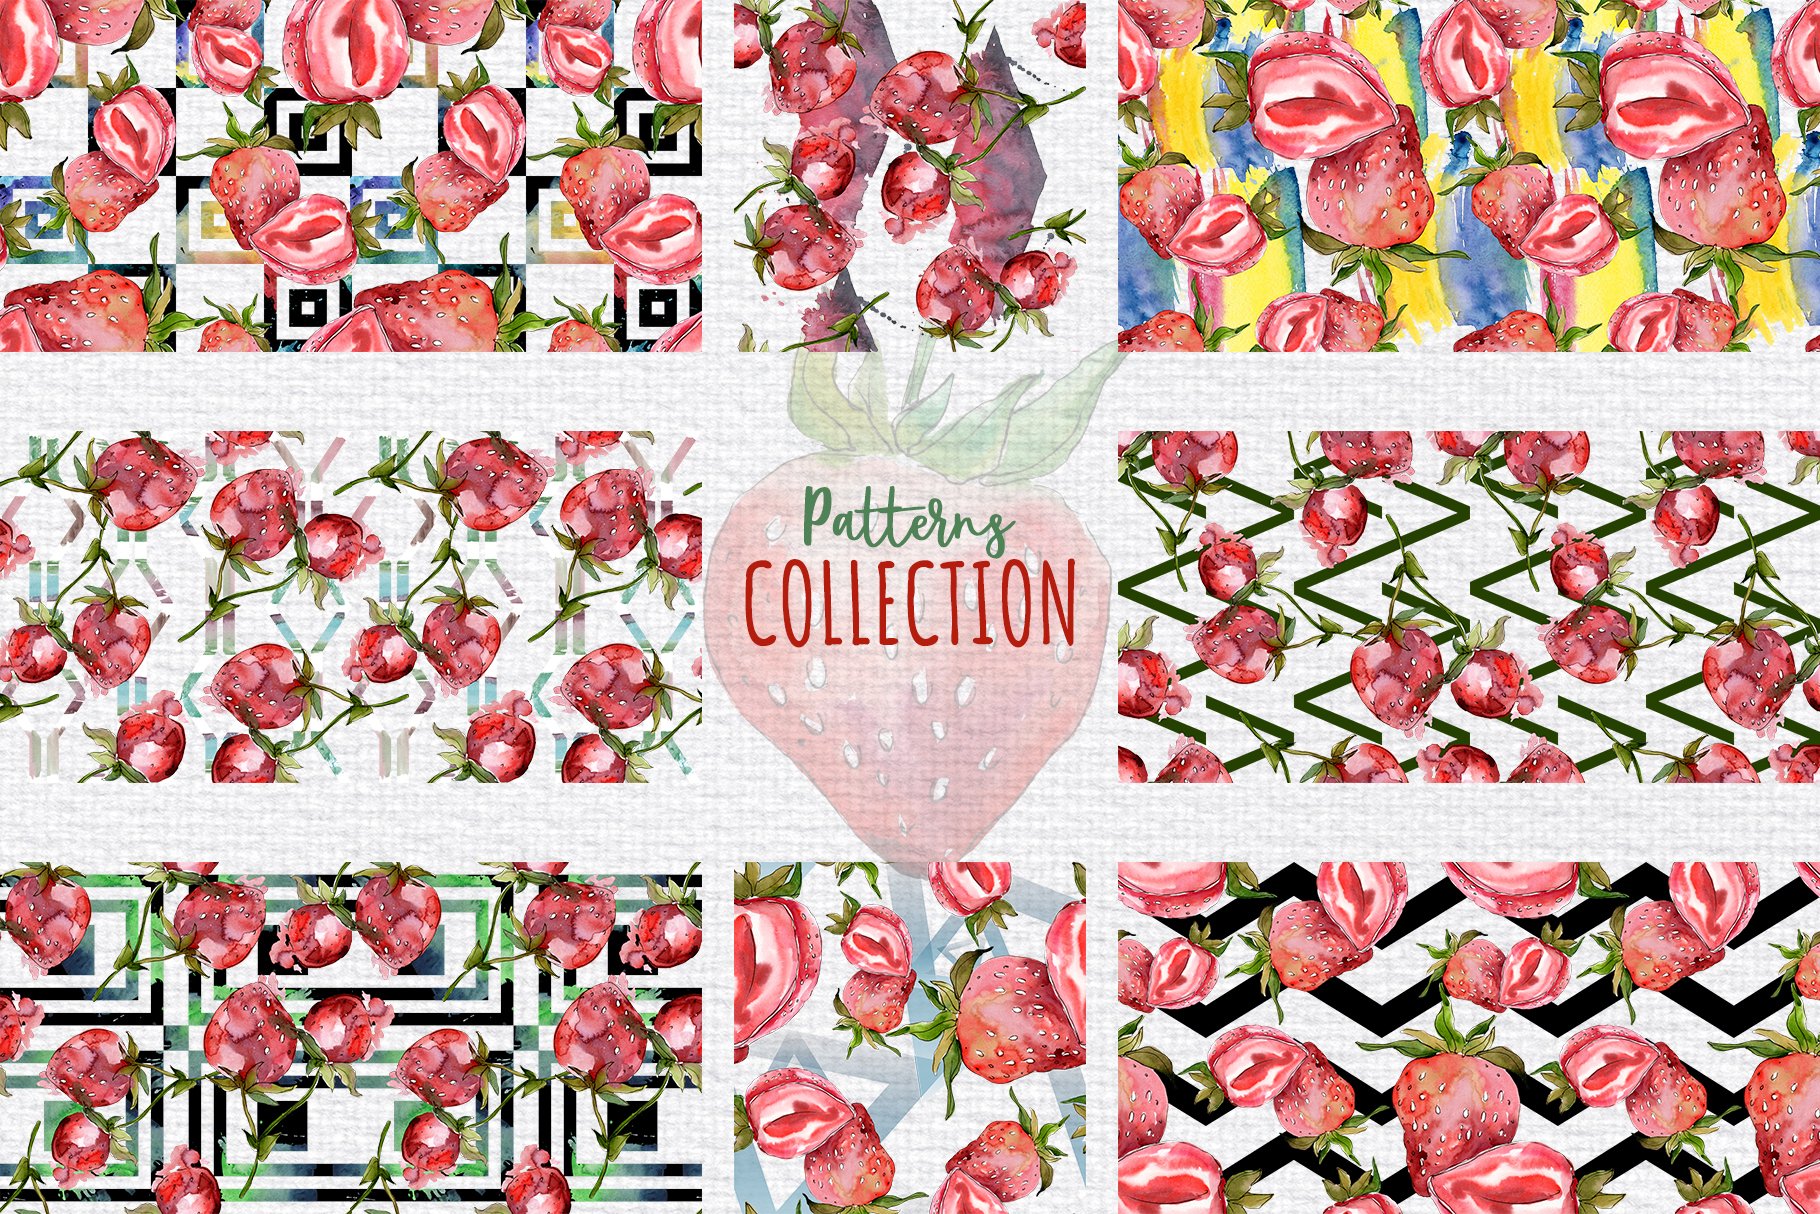 Some strawberries patterns for your brand and products.